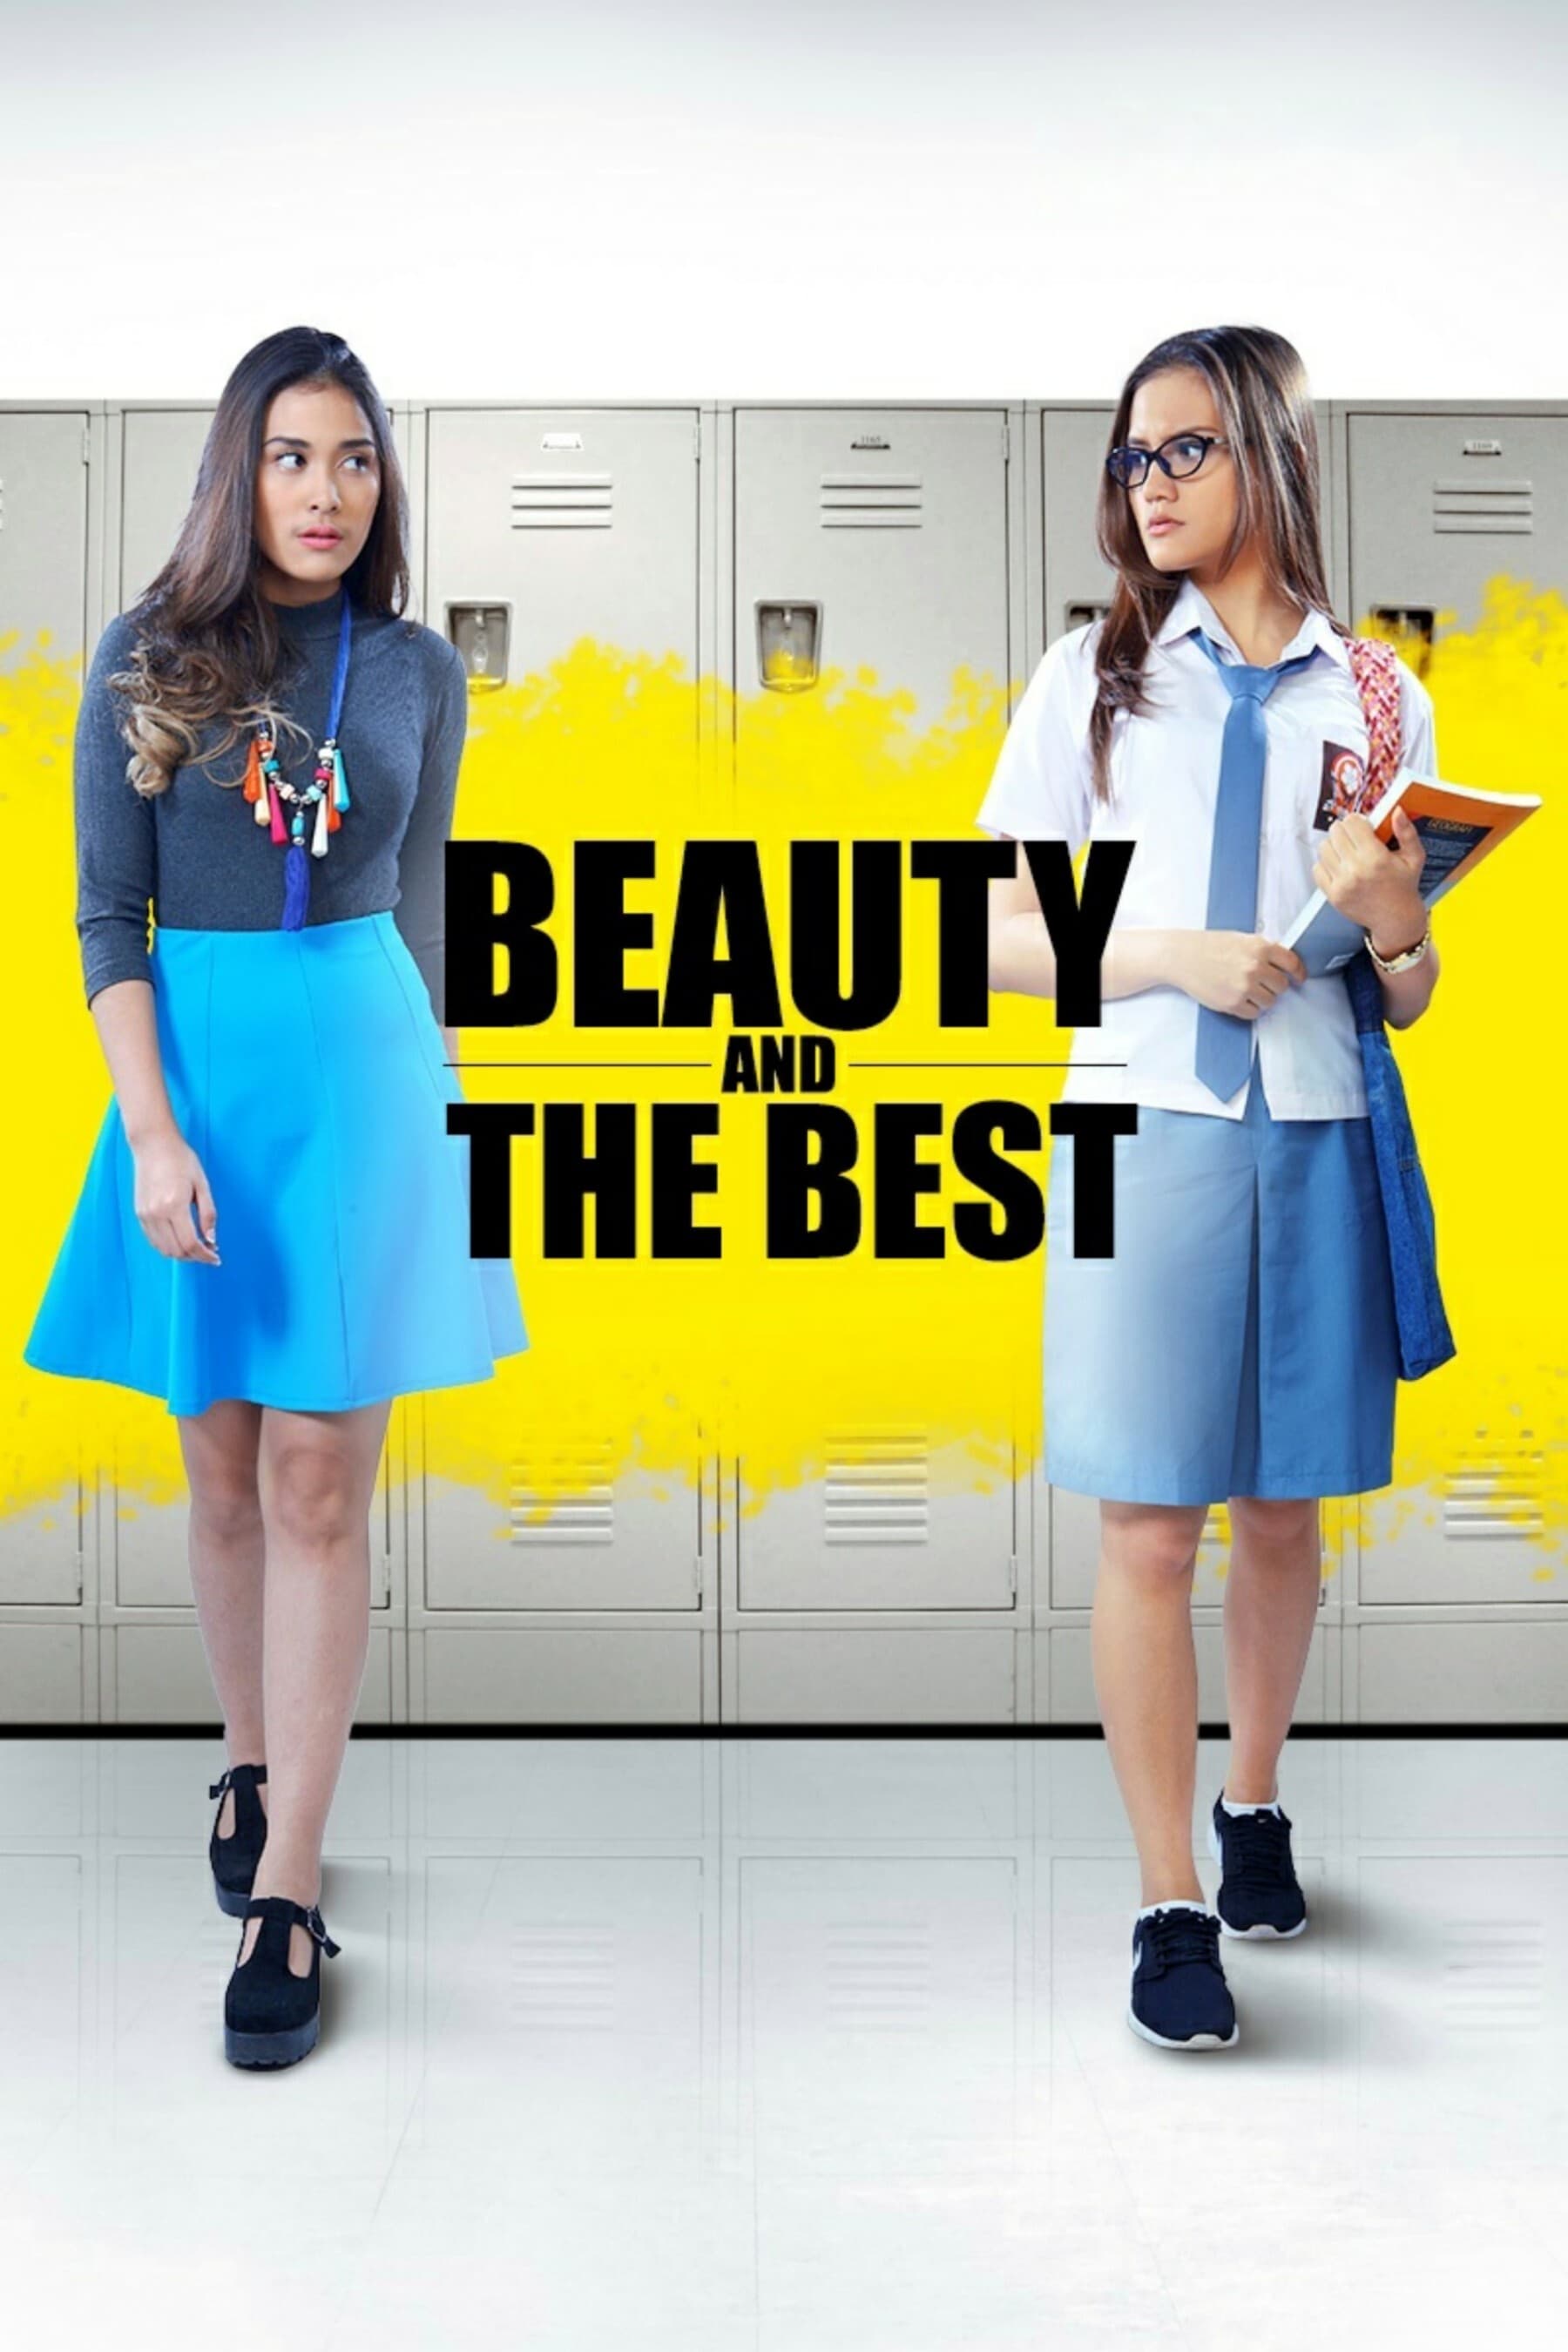 Beauty and the Best (2016)